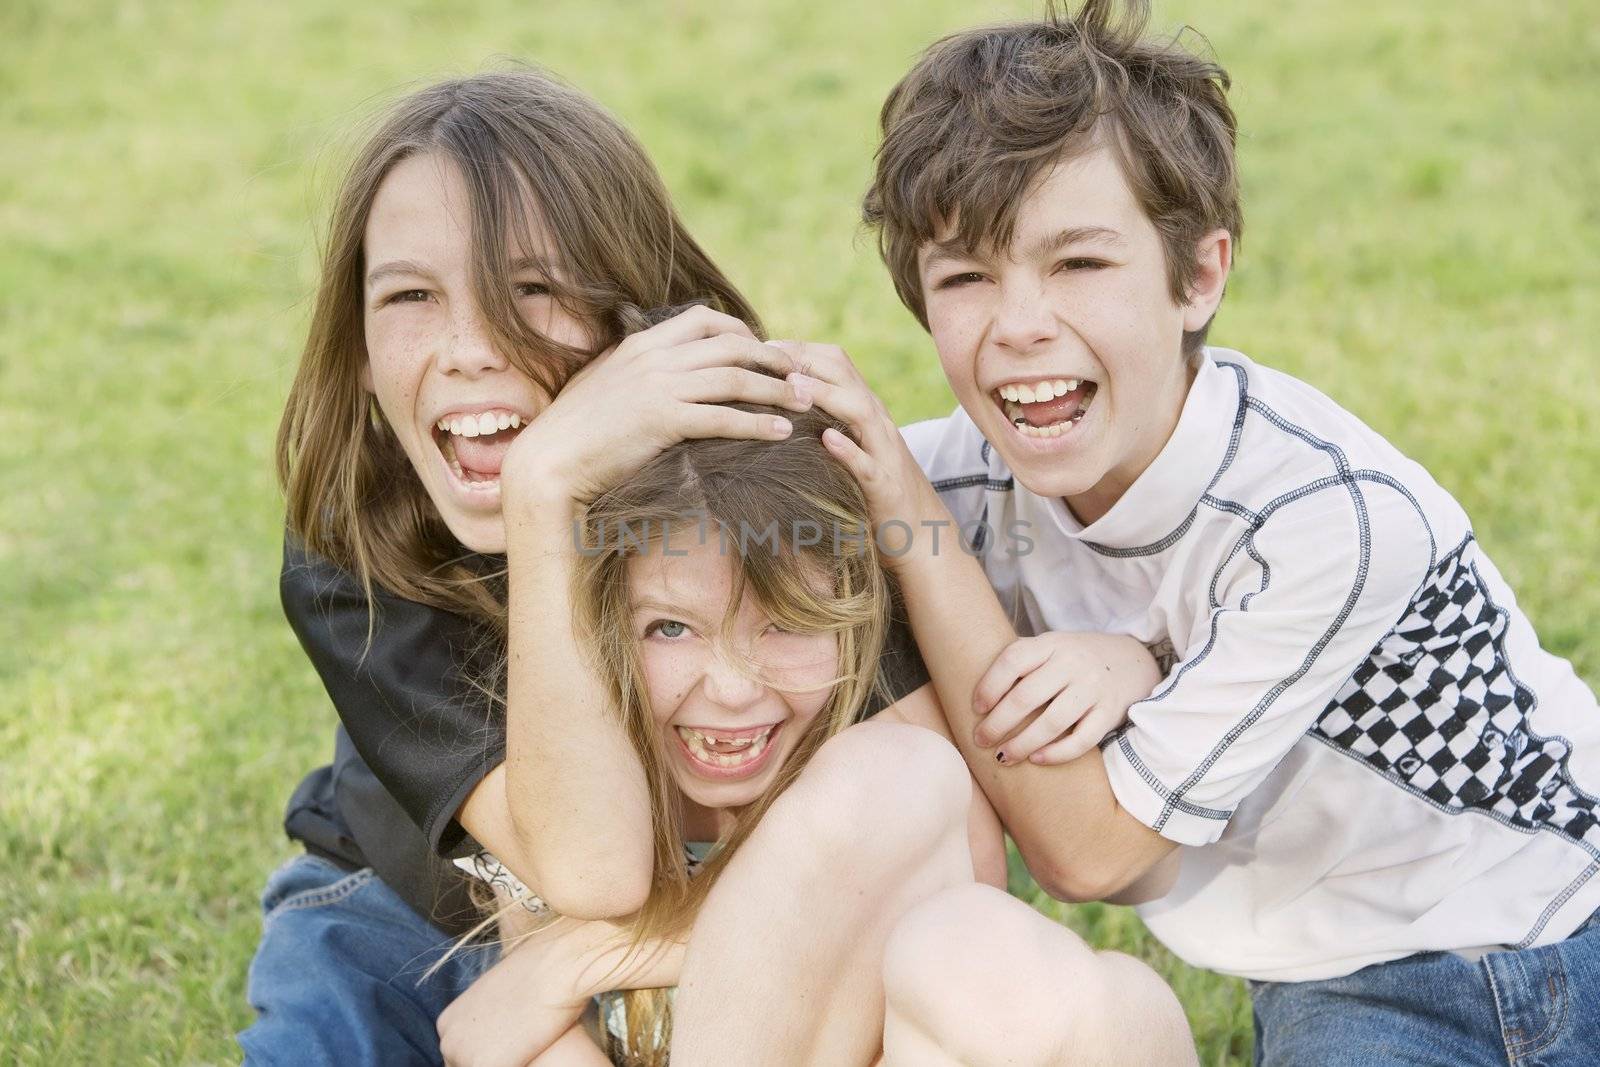 Three young siblings wrestling outdoors on the grass